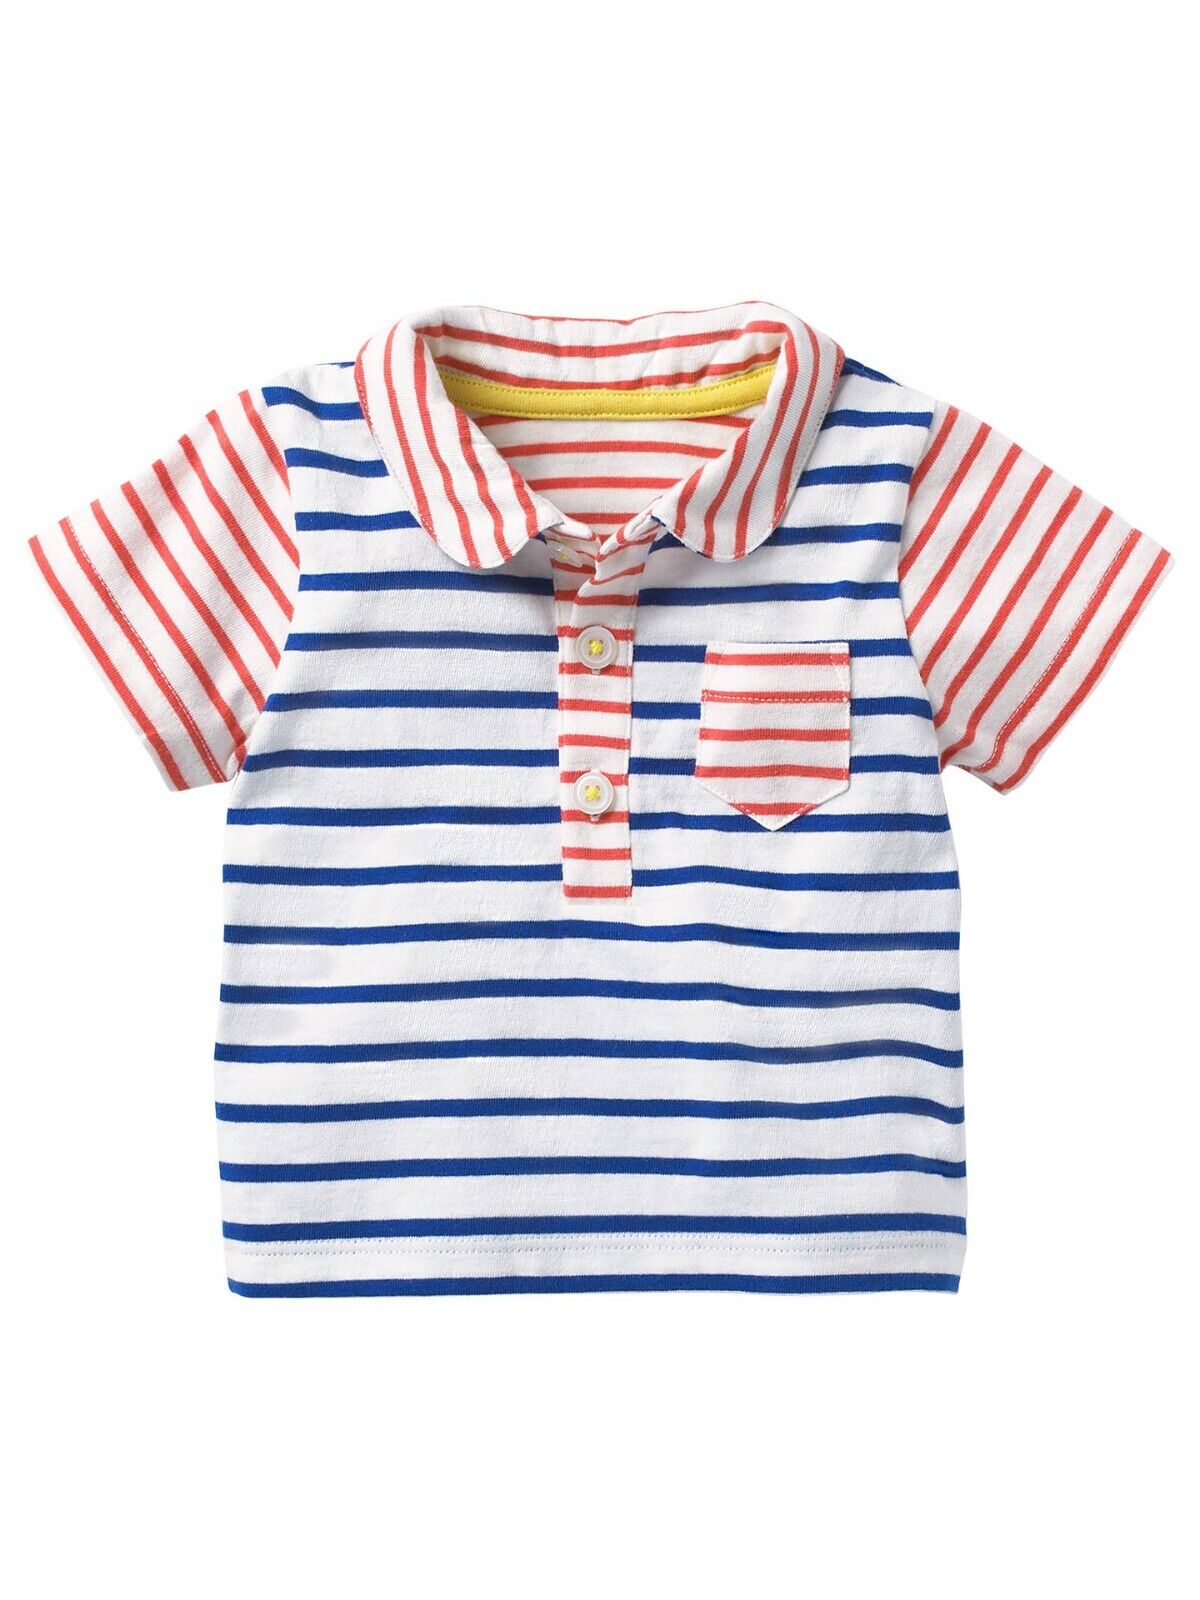 EX Mini Boden Baby Stripe Collared Polo Shirt White/Blue/Red 0-3, 3-6 Months